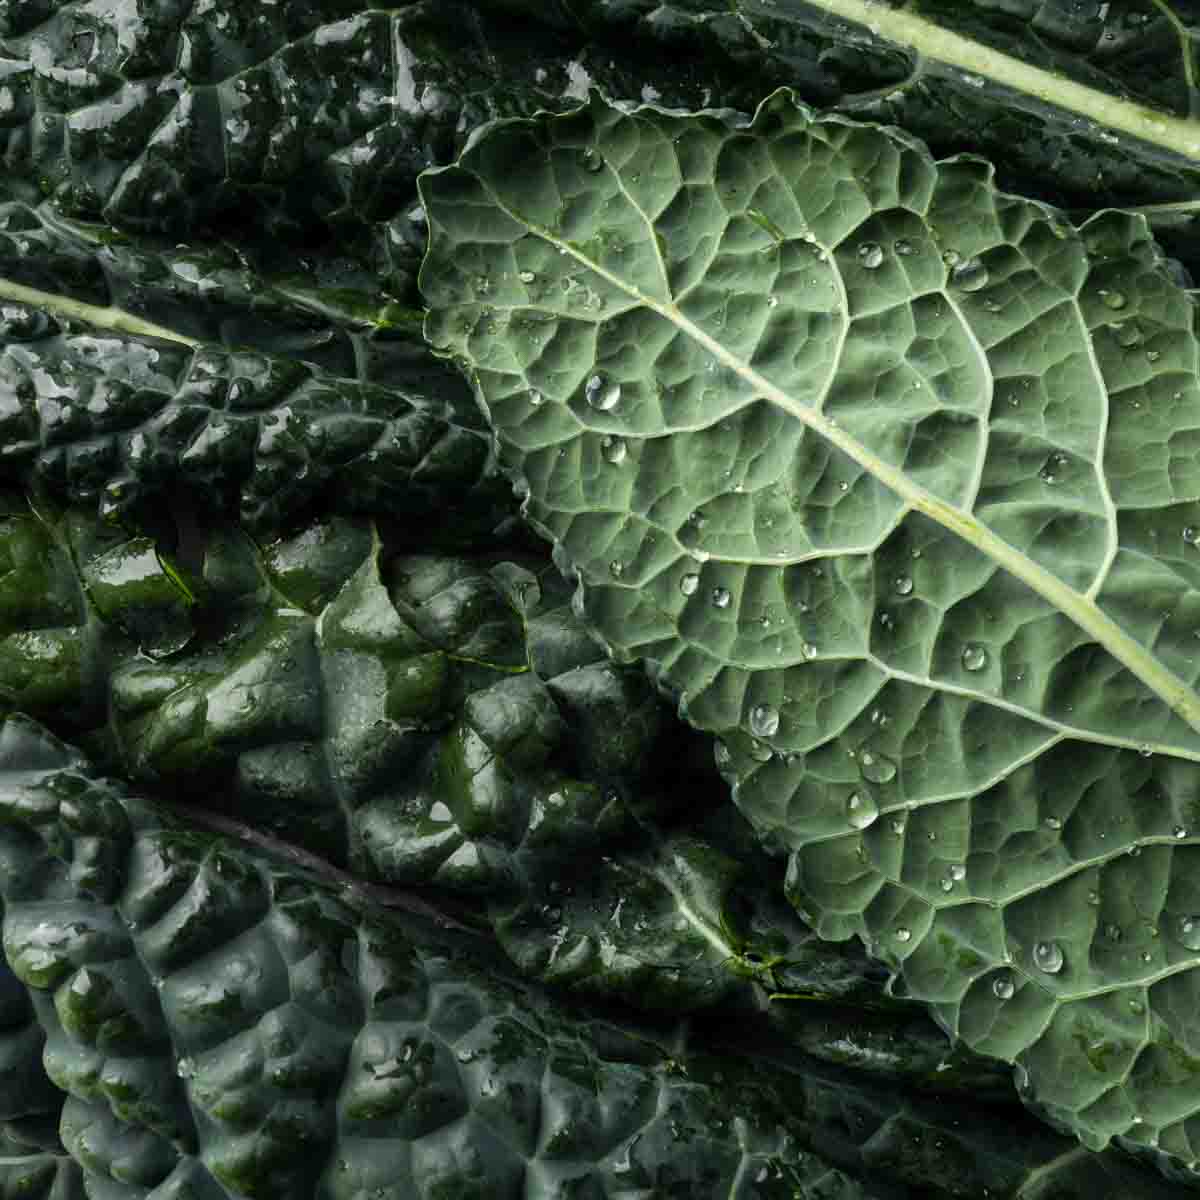 A close up image of the dark, dimpled Tuscan kale leaves.